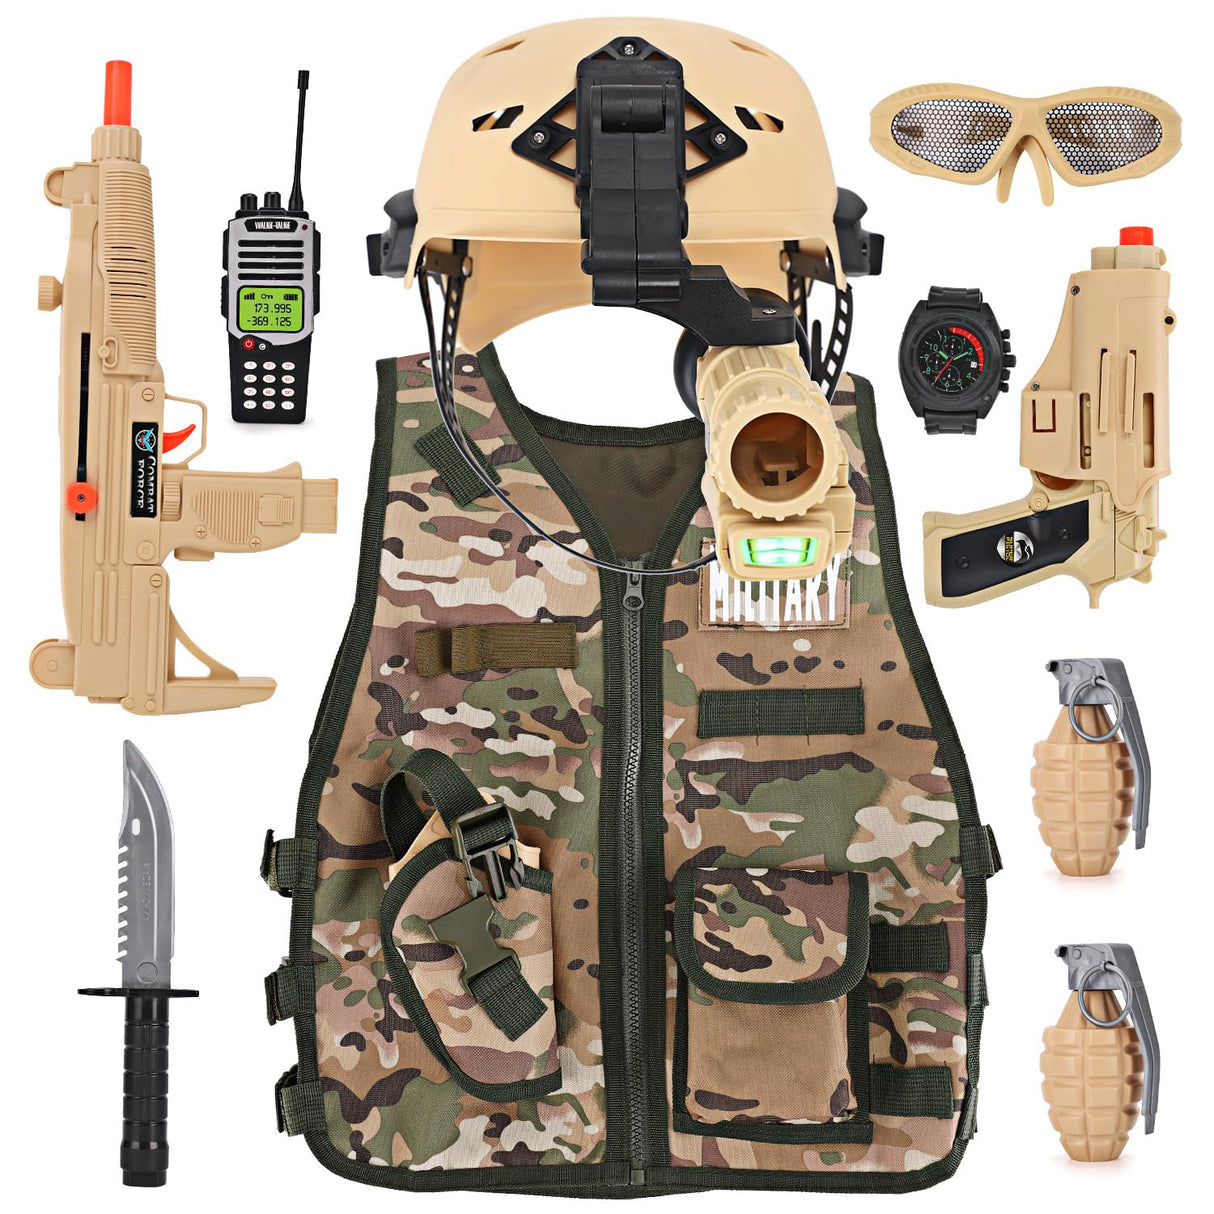 Liberty Imports Kids Army Soldier Military Combat Marines Desert Camo Halloween Costume, Deluxe Dress Up Cosplay Role Play Set with Helmet, Monocular, Toy Guns, Accessories (11 Pcs)